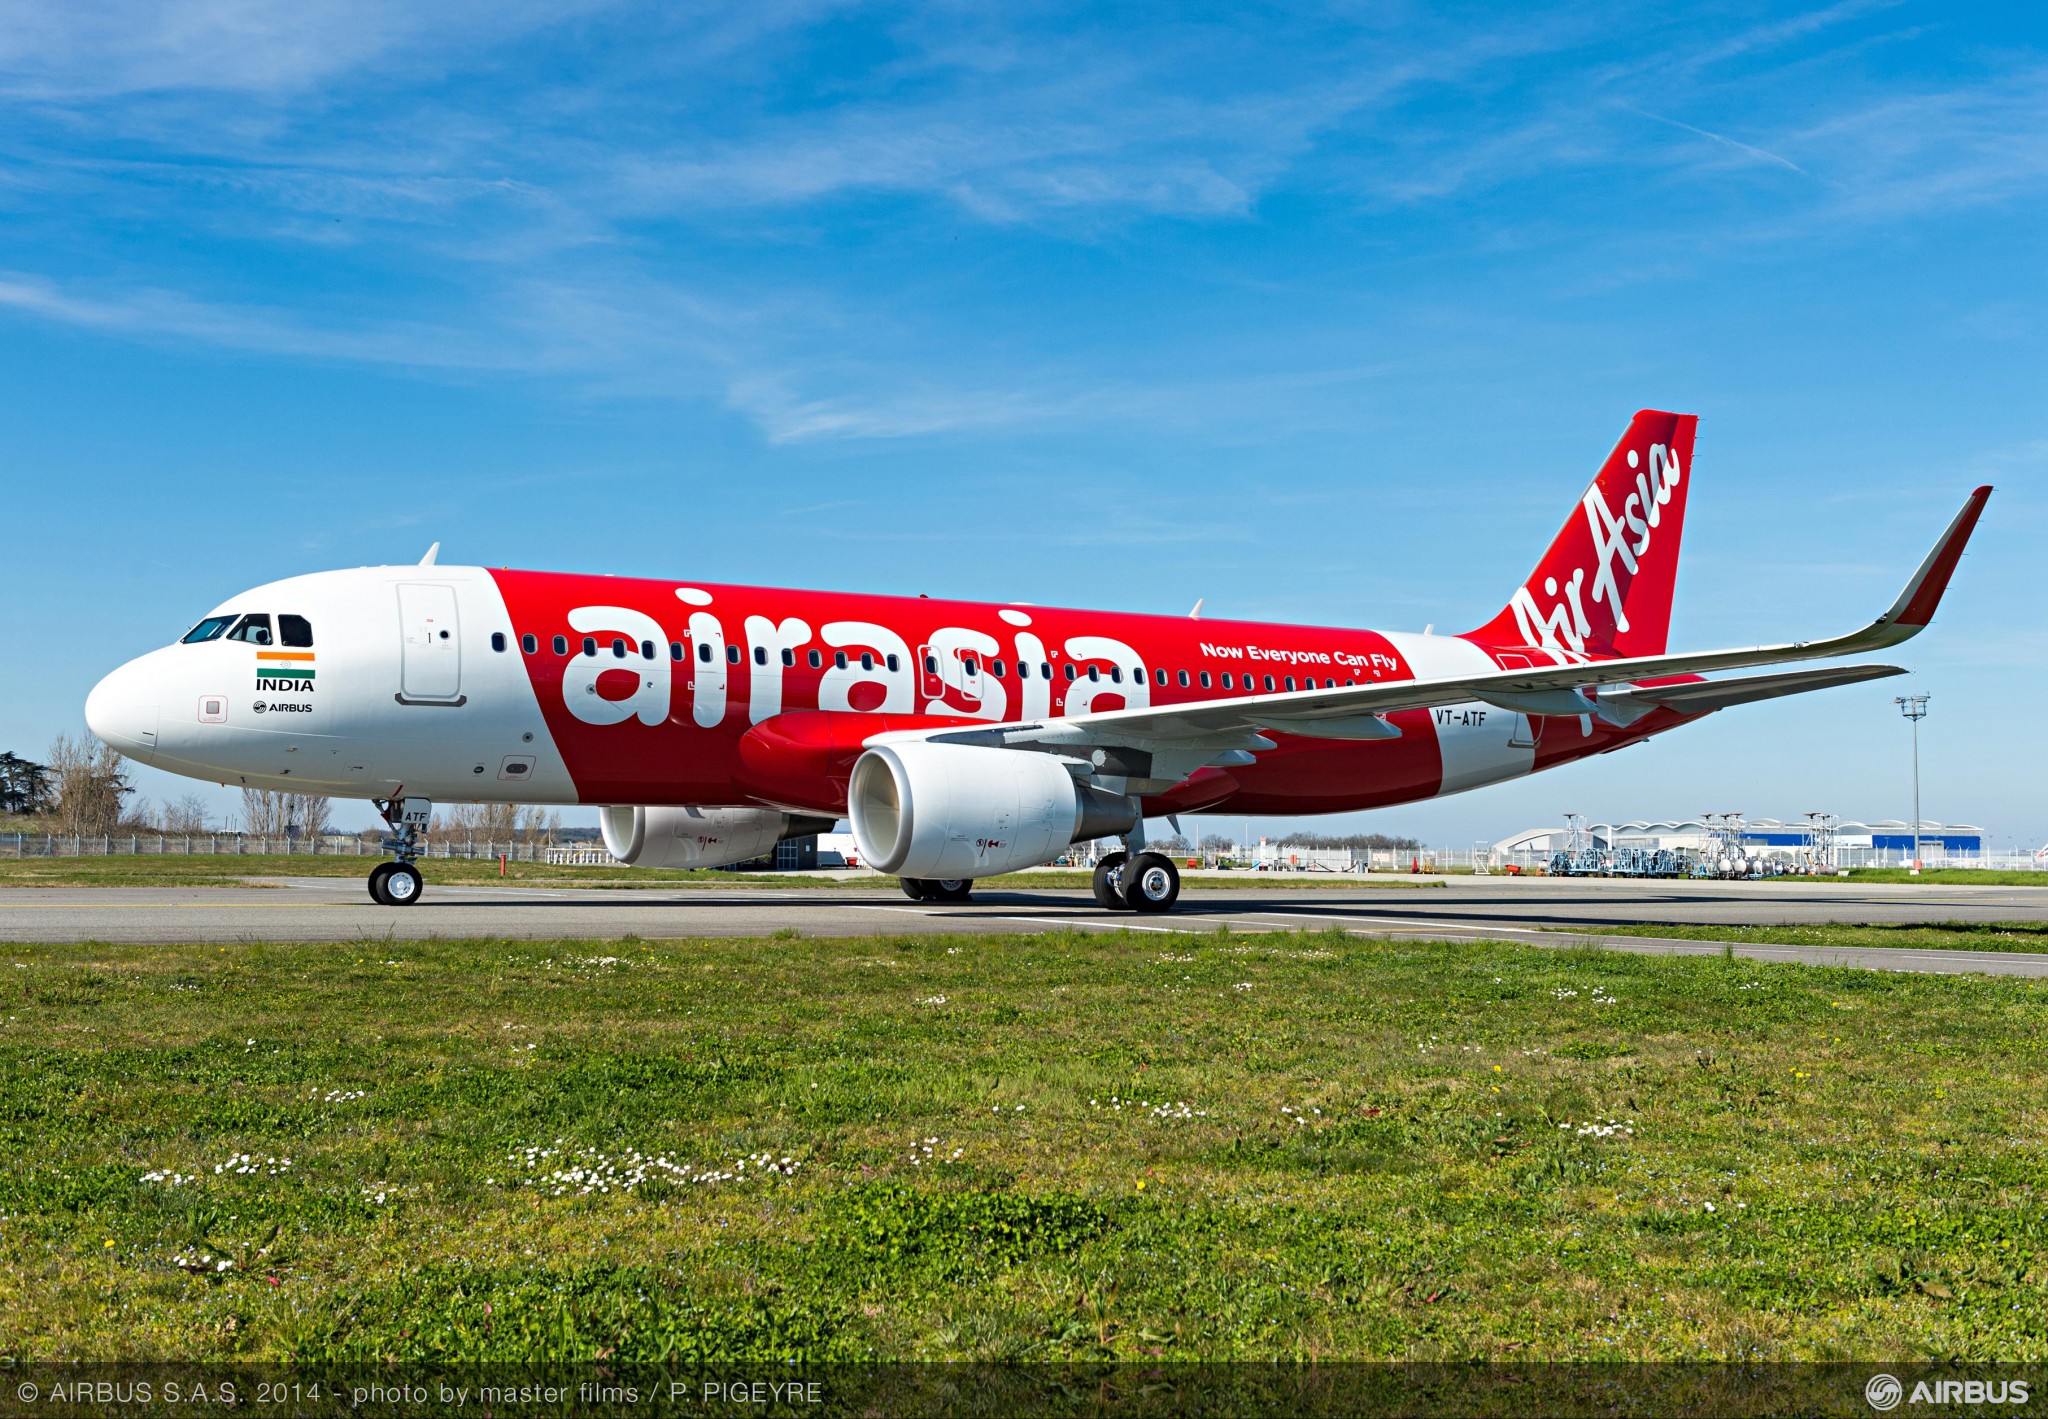 AirAsia India plans robust winter schedule with 21 weekly domestic flights